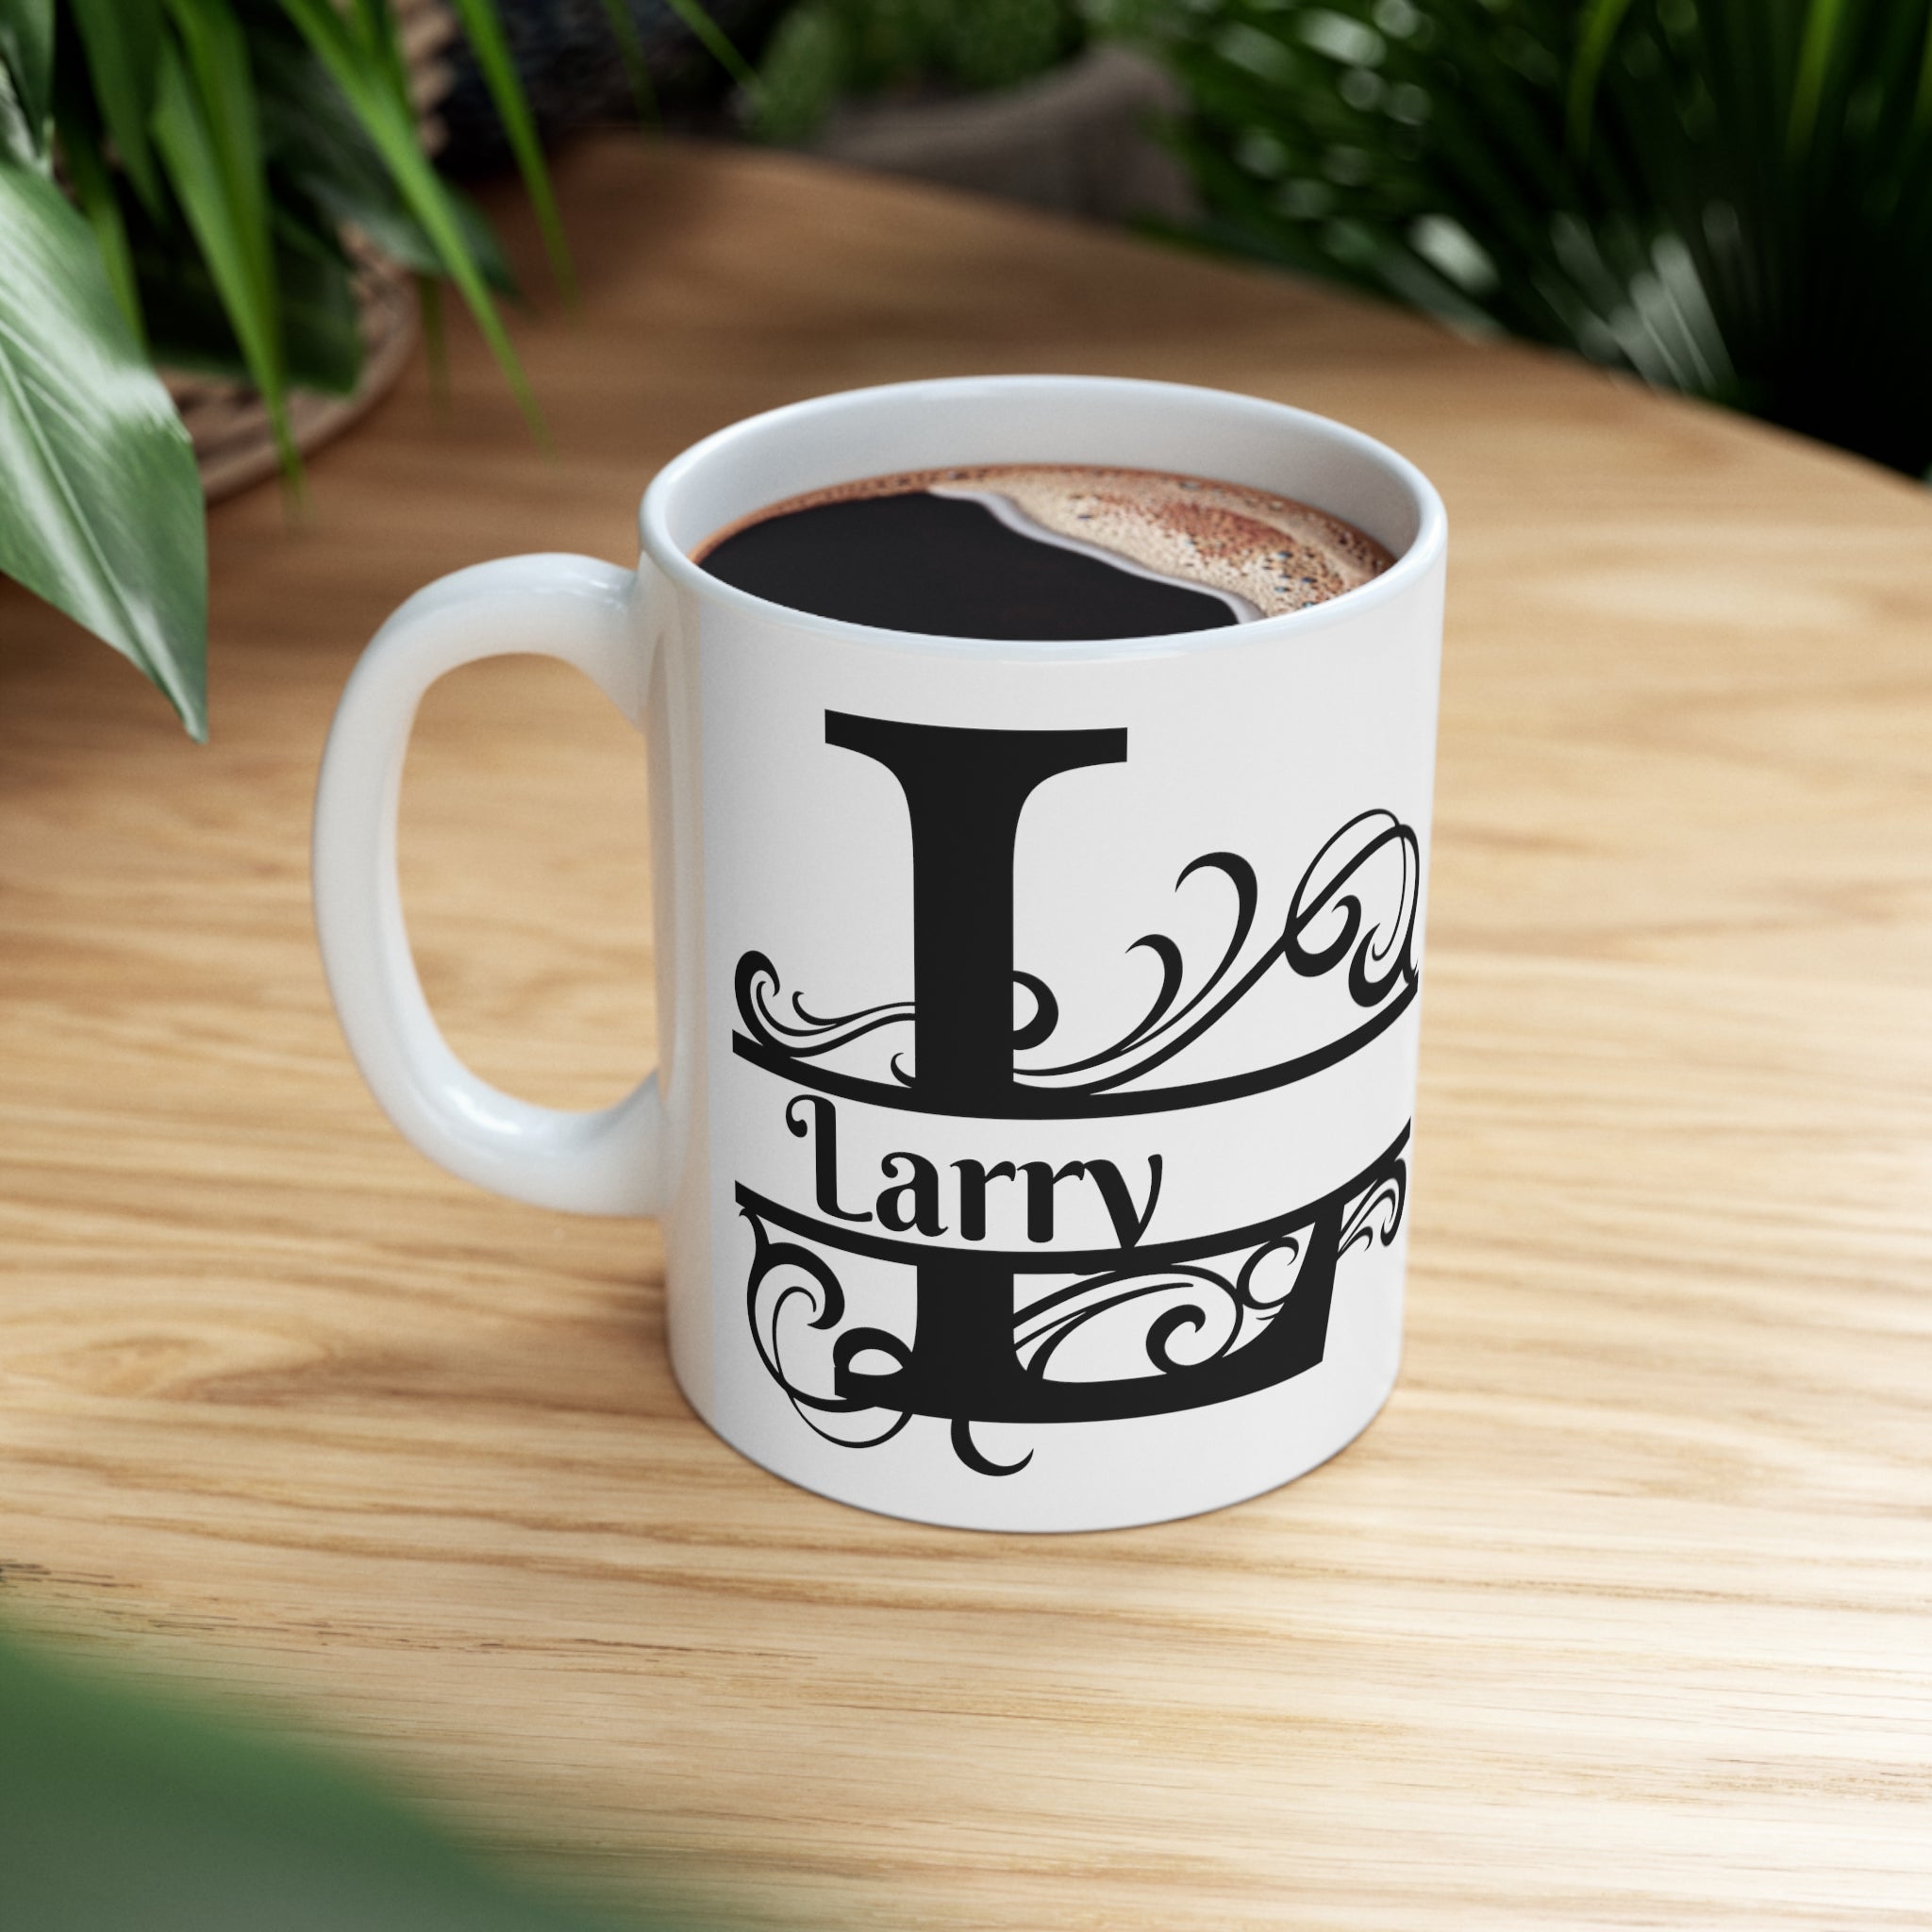 Customized Name and Initial Mug for Daily Use